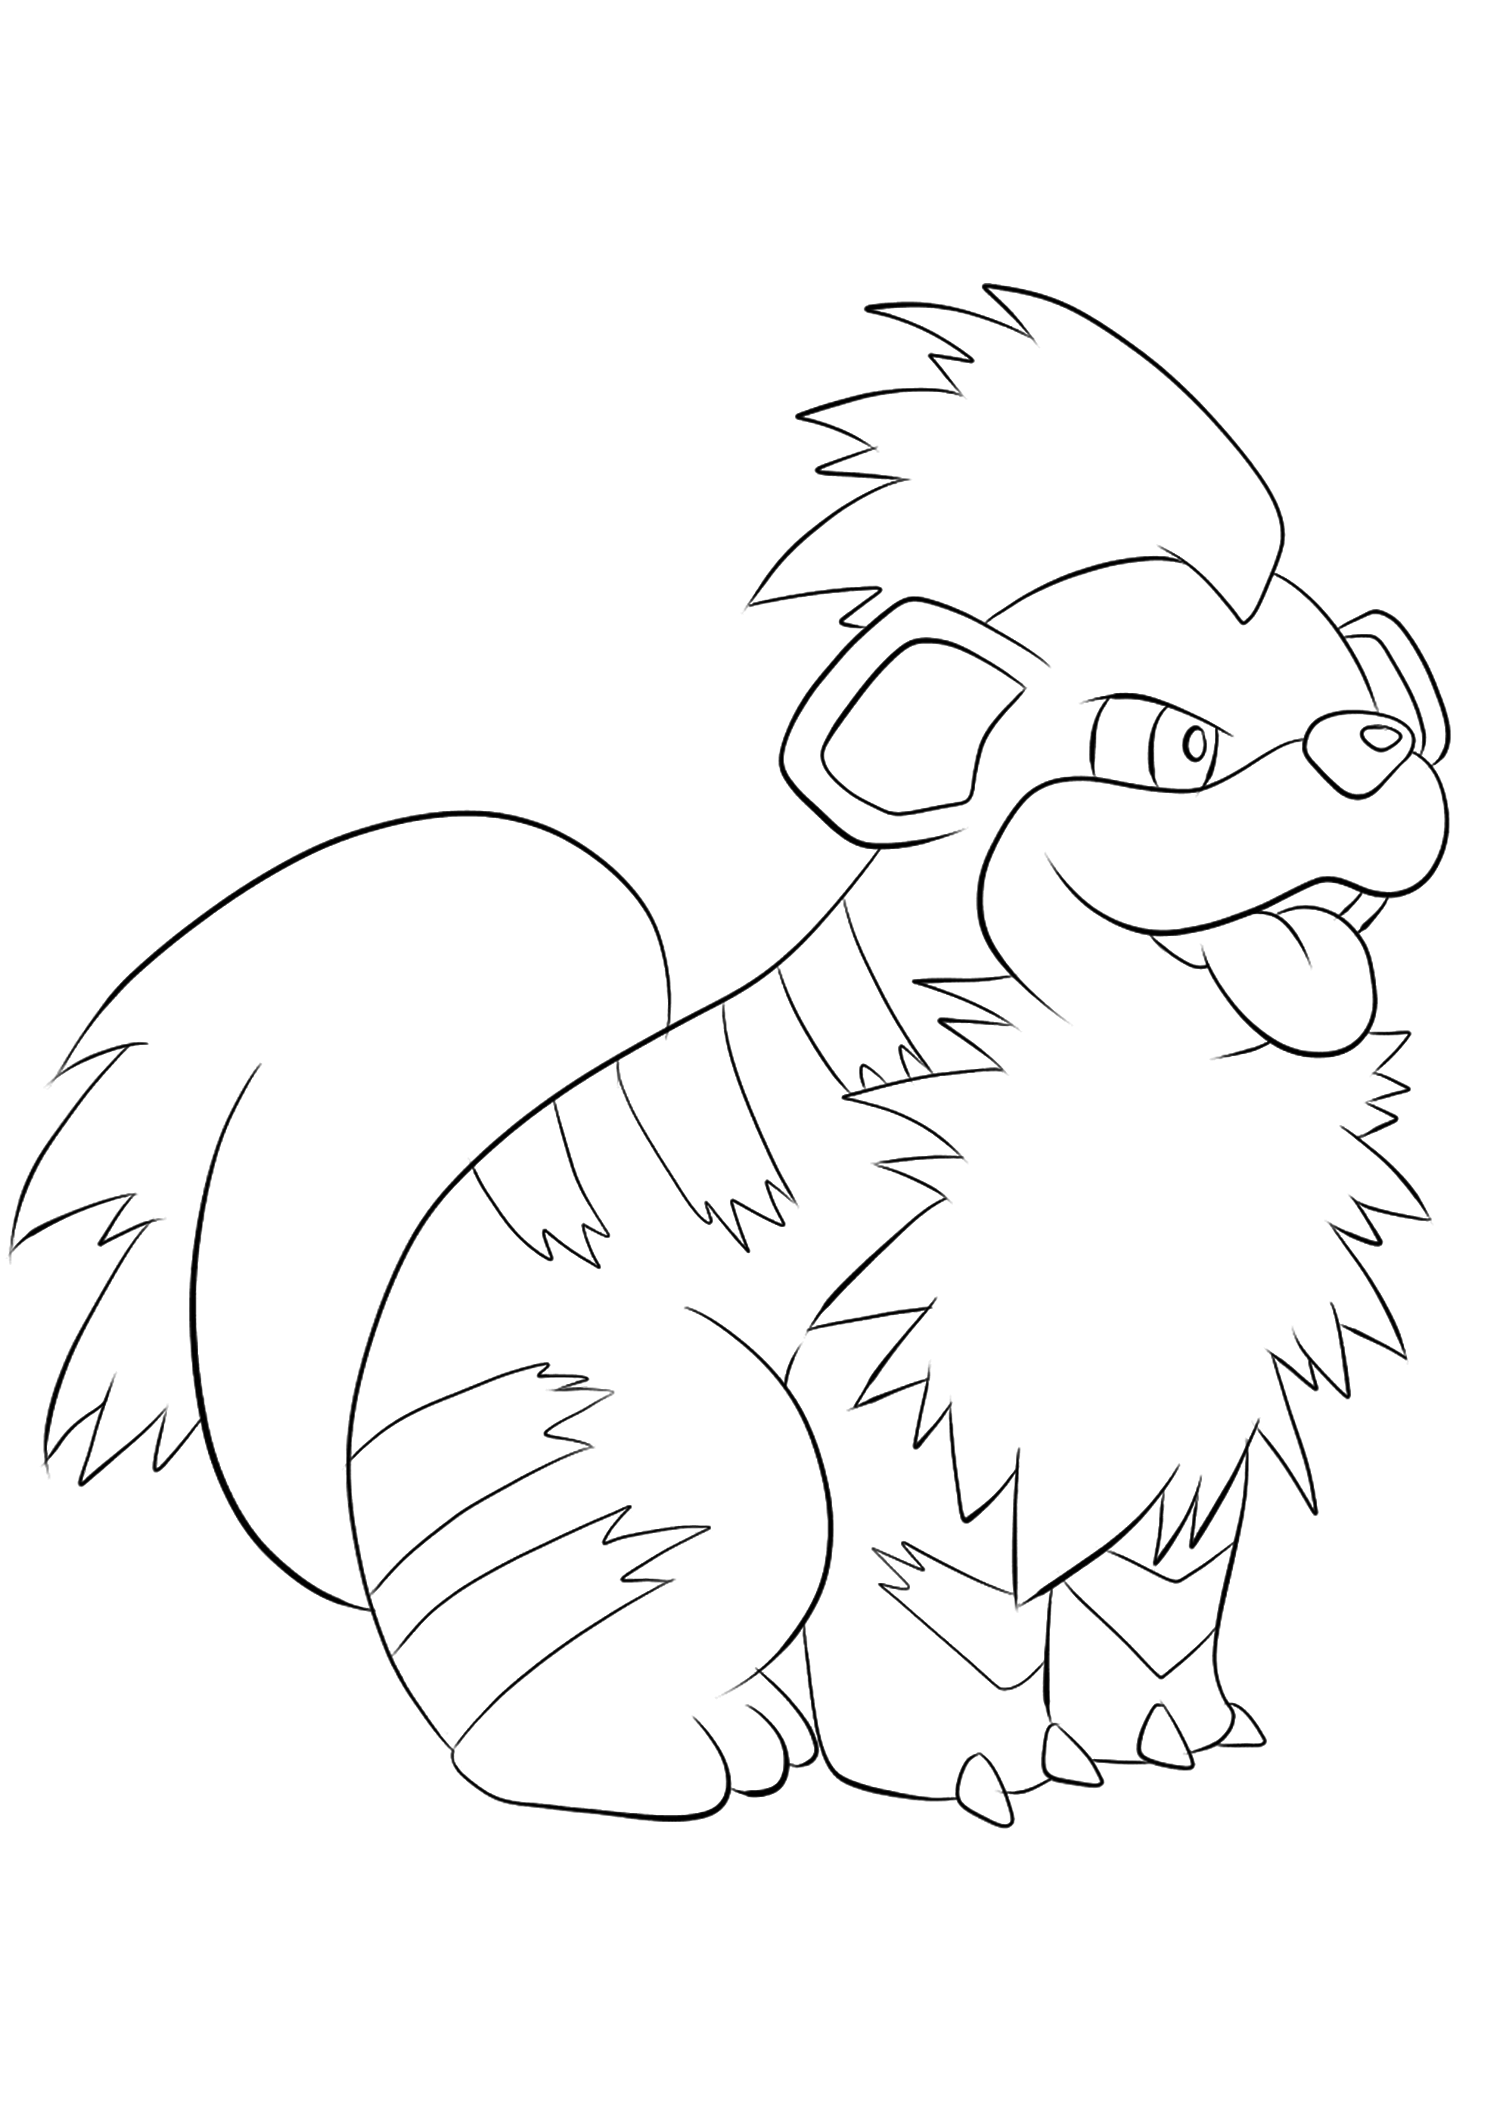 557 Unicorn Growlithe Coloring Page for Adult